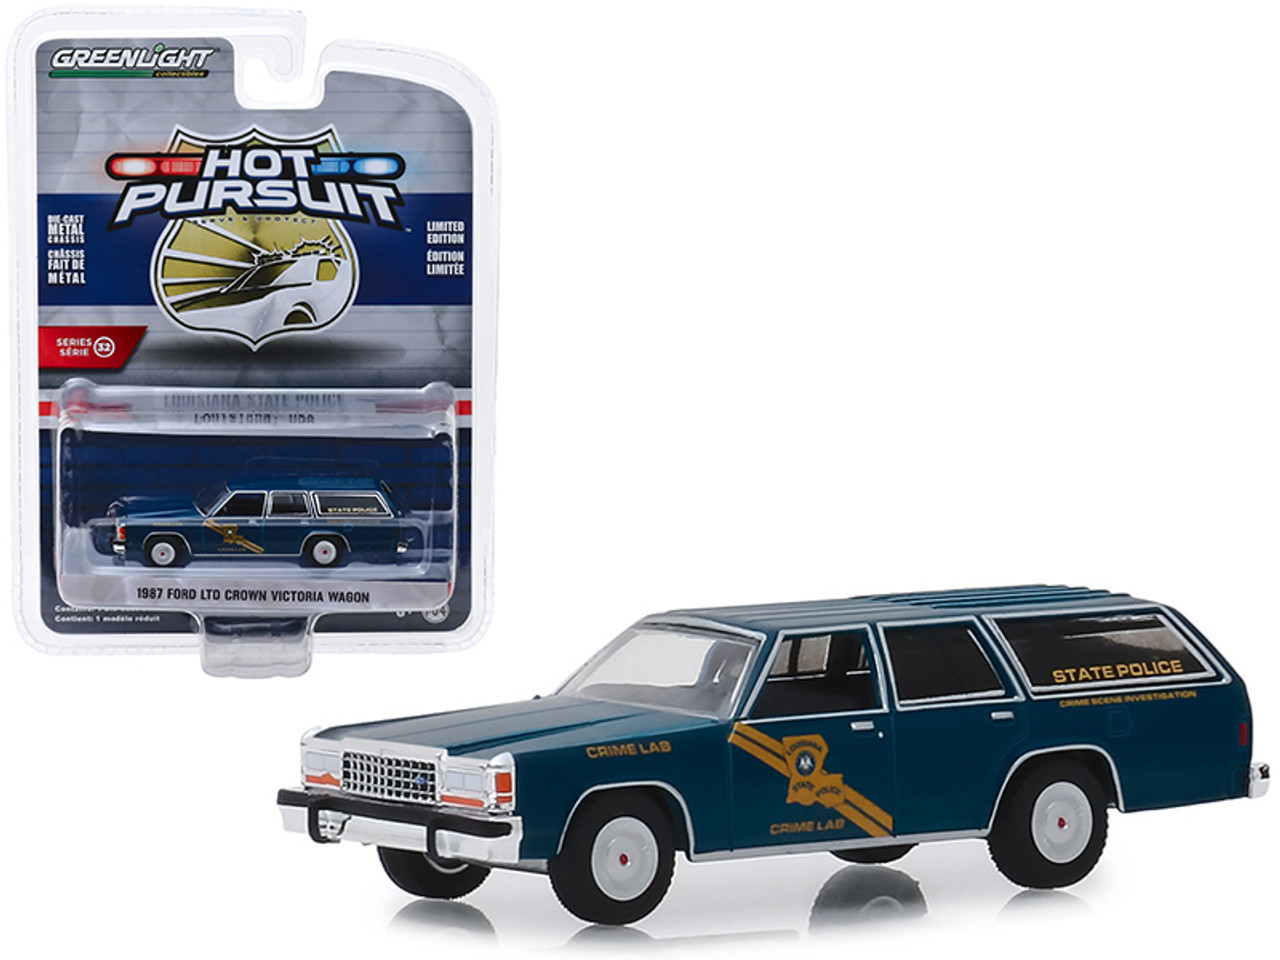 1987 Ford LTD Crown Victoria Wagon "Louisiana State Police Crime Scene Investigation" Crime Lab "Hot Pursuit" Series 32 1/64 Diecast Model Car by Greenlight